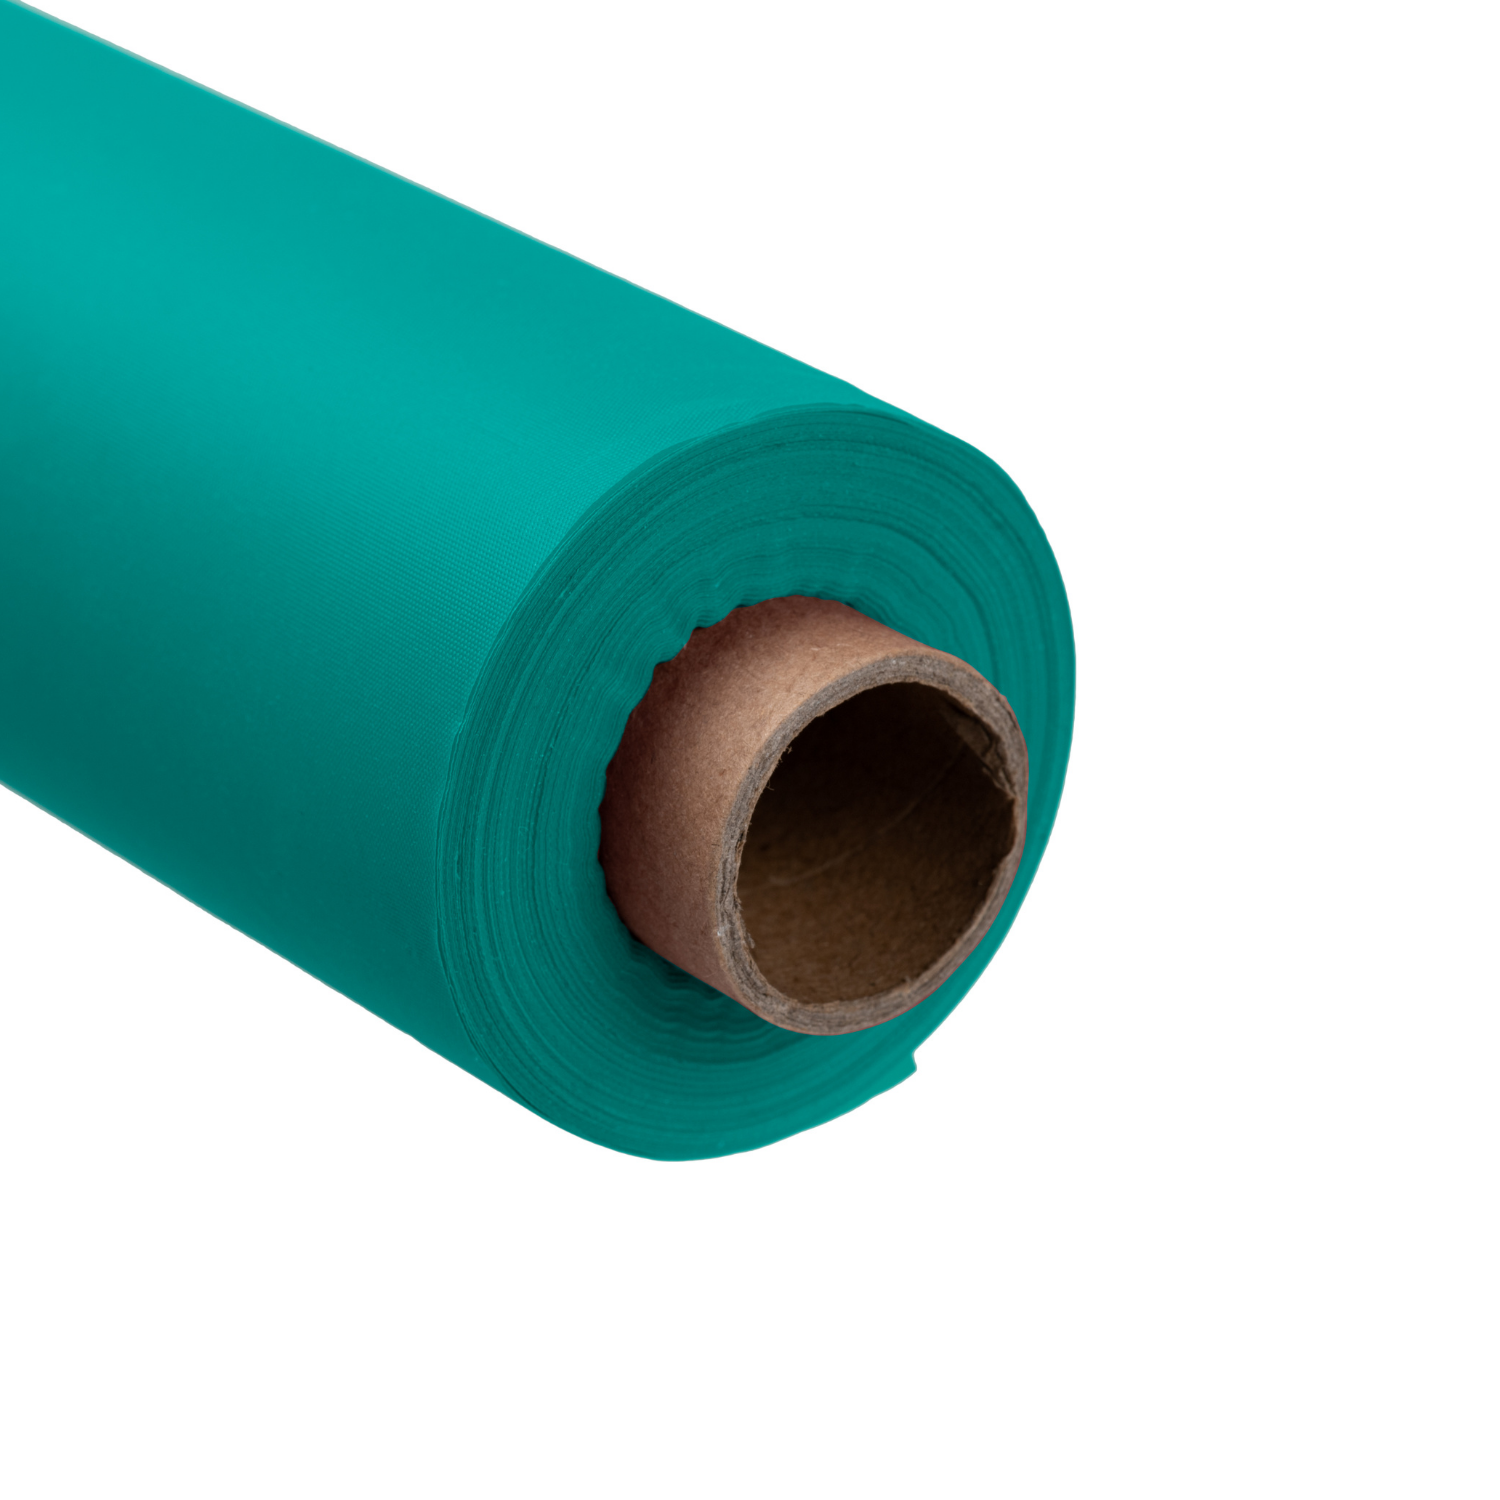 40 In. X 300 Ft. Premium Teal Plastic Table Roll | 4 Pack